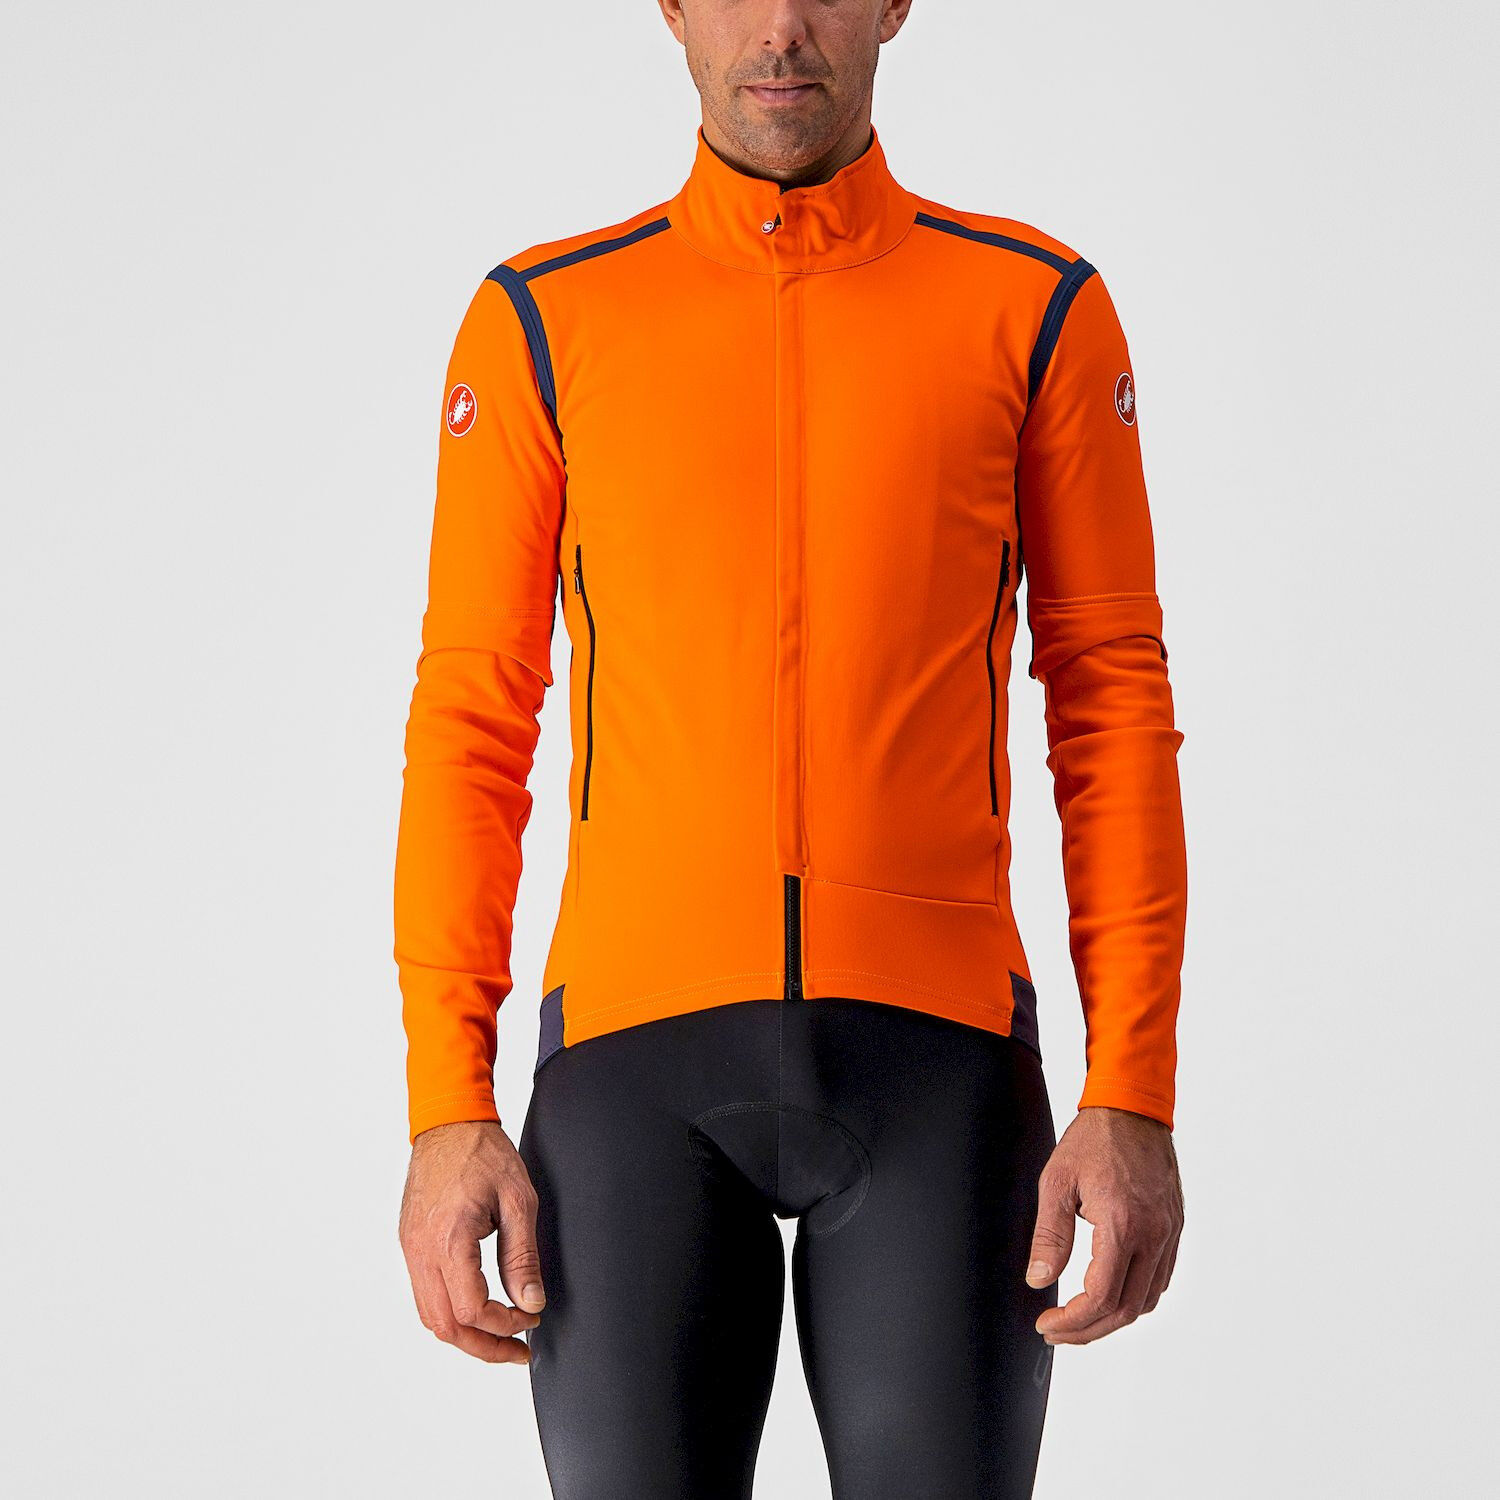 Castelli Perfetto Ros Convertible - Cycling jacket - Men's